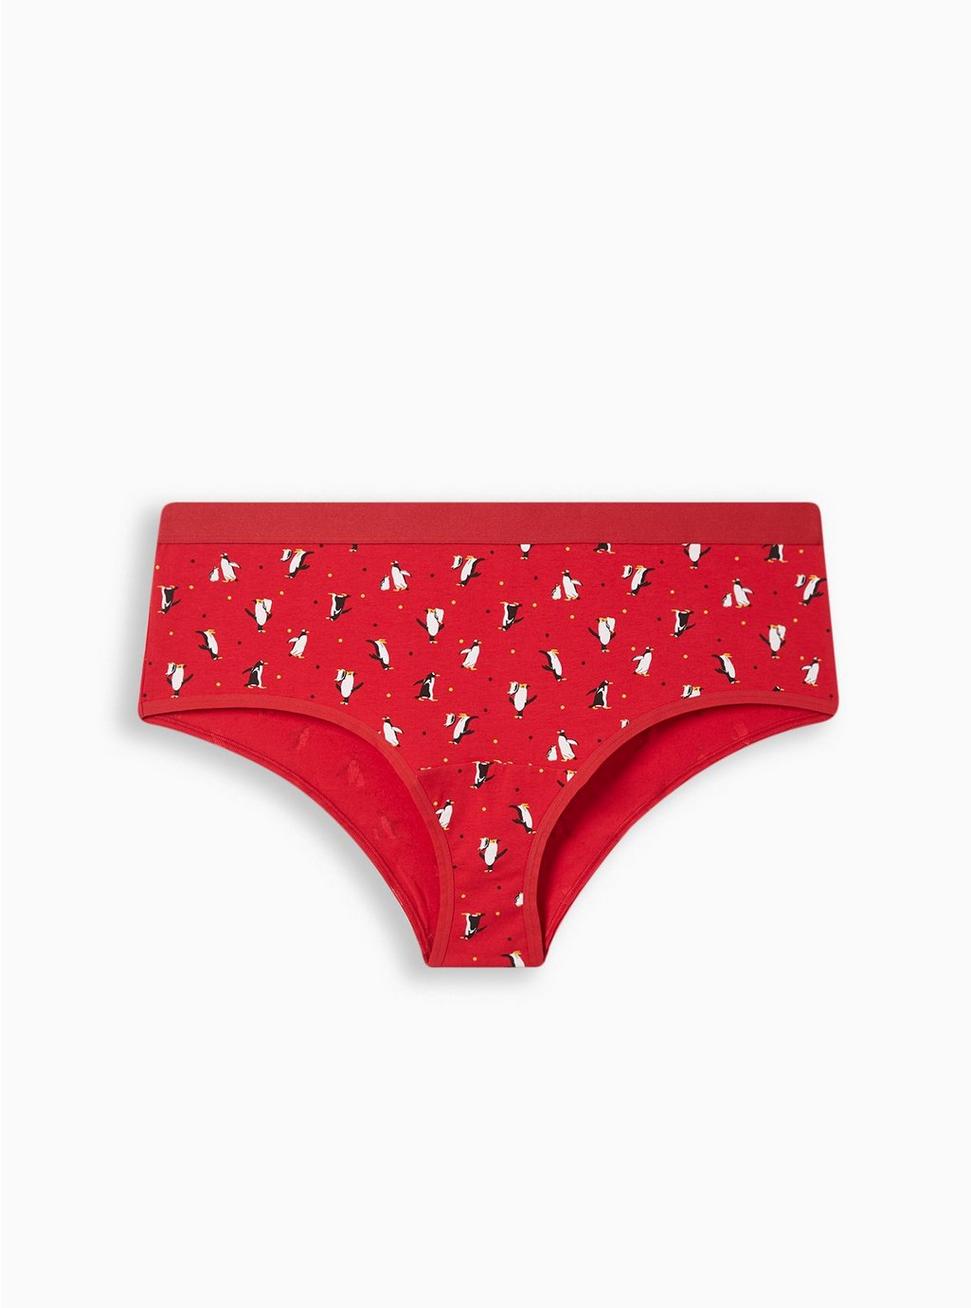 Cotton Mid-Rise Cheeky Panty, PENGUINS RED DOT, hi-res